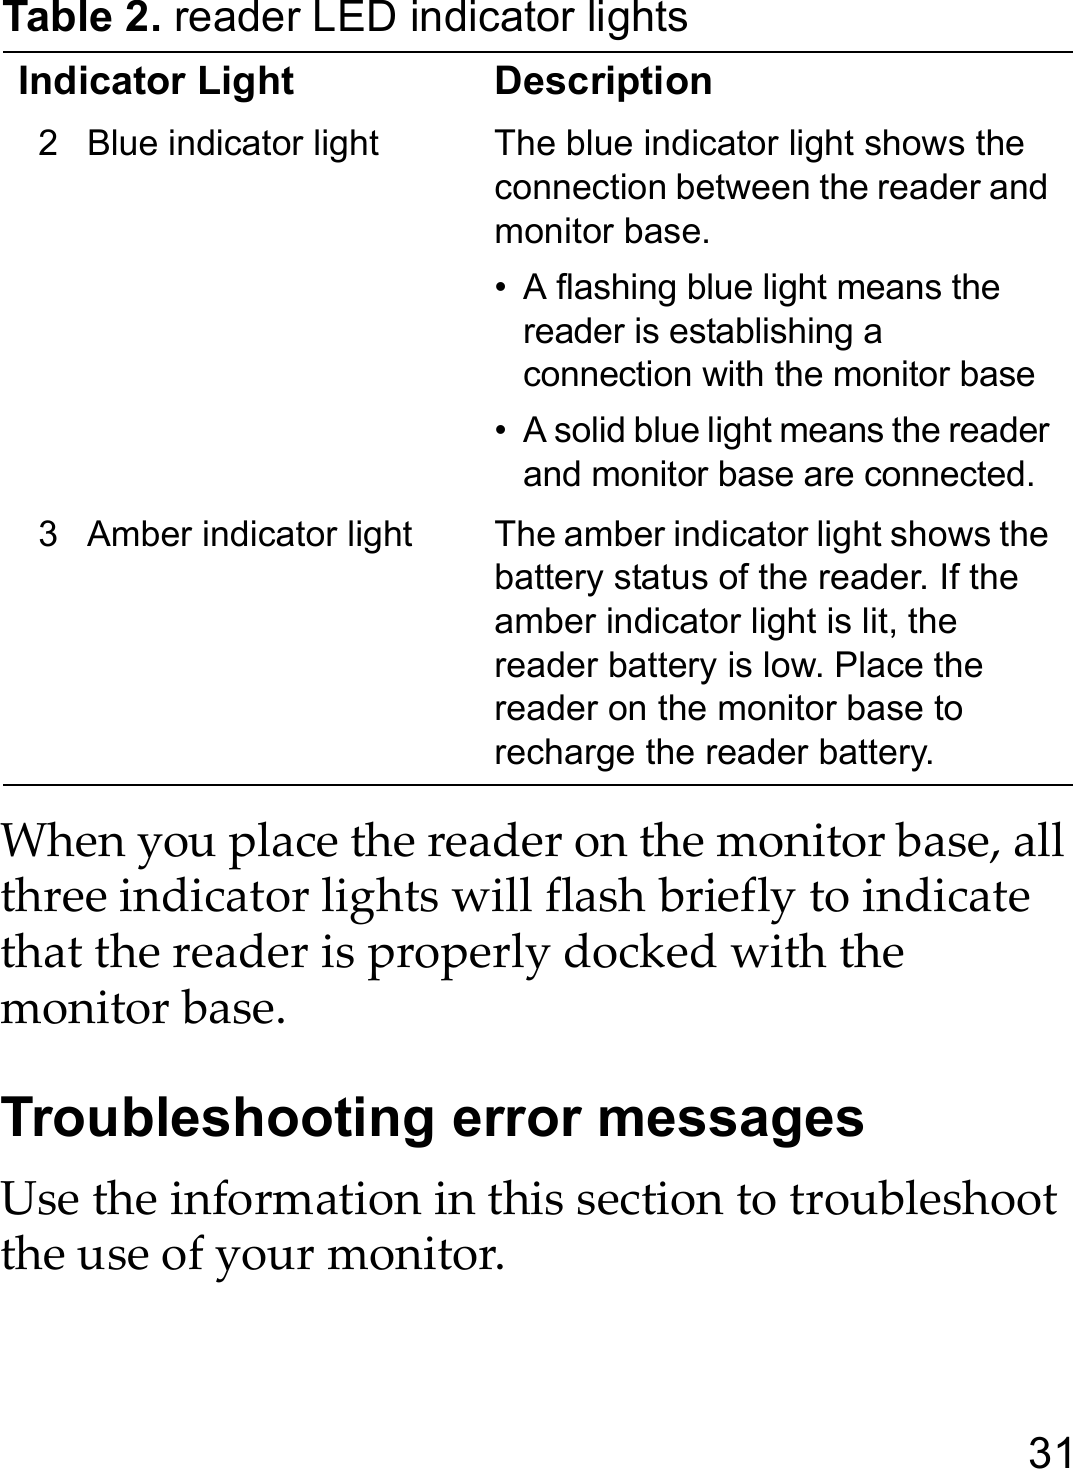 31When you place the reader on the monitor base, all three indicator lights will flash briefly to indicate that the reader is properly docked with the monitor base.Troubleshooting error messagesUse the information in this section to troubleshoot the use of your monitor.2 Blue indicator light The blue indicator light shows the connection between the reader and monitor base.• A flashing blue light means the reader is establishing a connection with the monitor base• A solid blue light means the reader and monitor base are connected.3 Amber indicator light The amber indicator light shows the battery status of the reader. If the amber indicator light is lit, the reader battery is low. Place the reader on the monitor base to recharge the reader battery.Table 2. reader LED indicator lightsIndicator Light Description